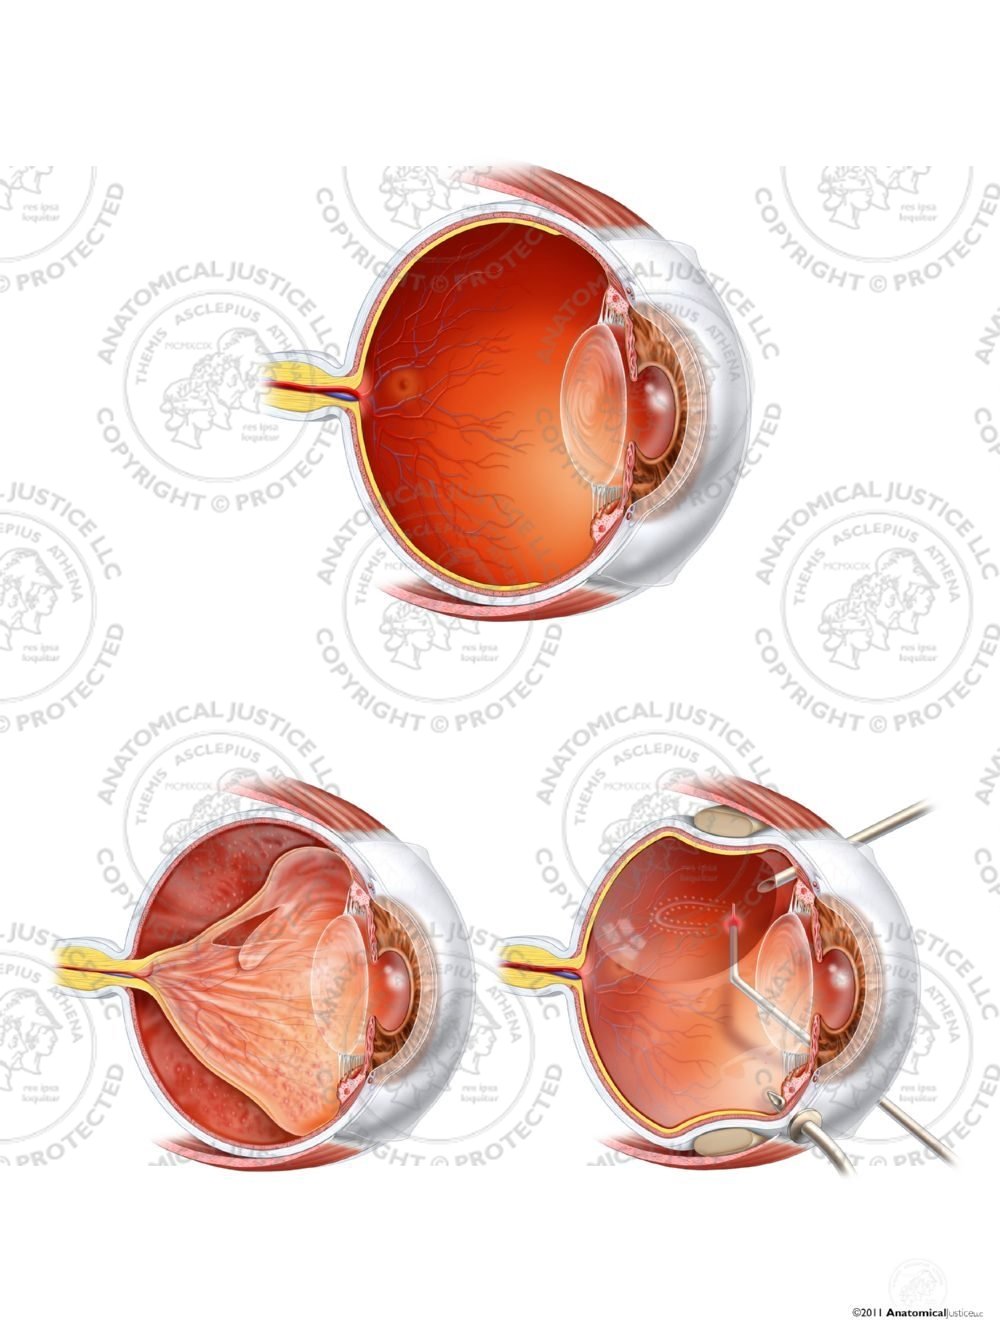 Retinal Detachment and Repair of the Left Eye – No Text